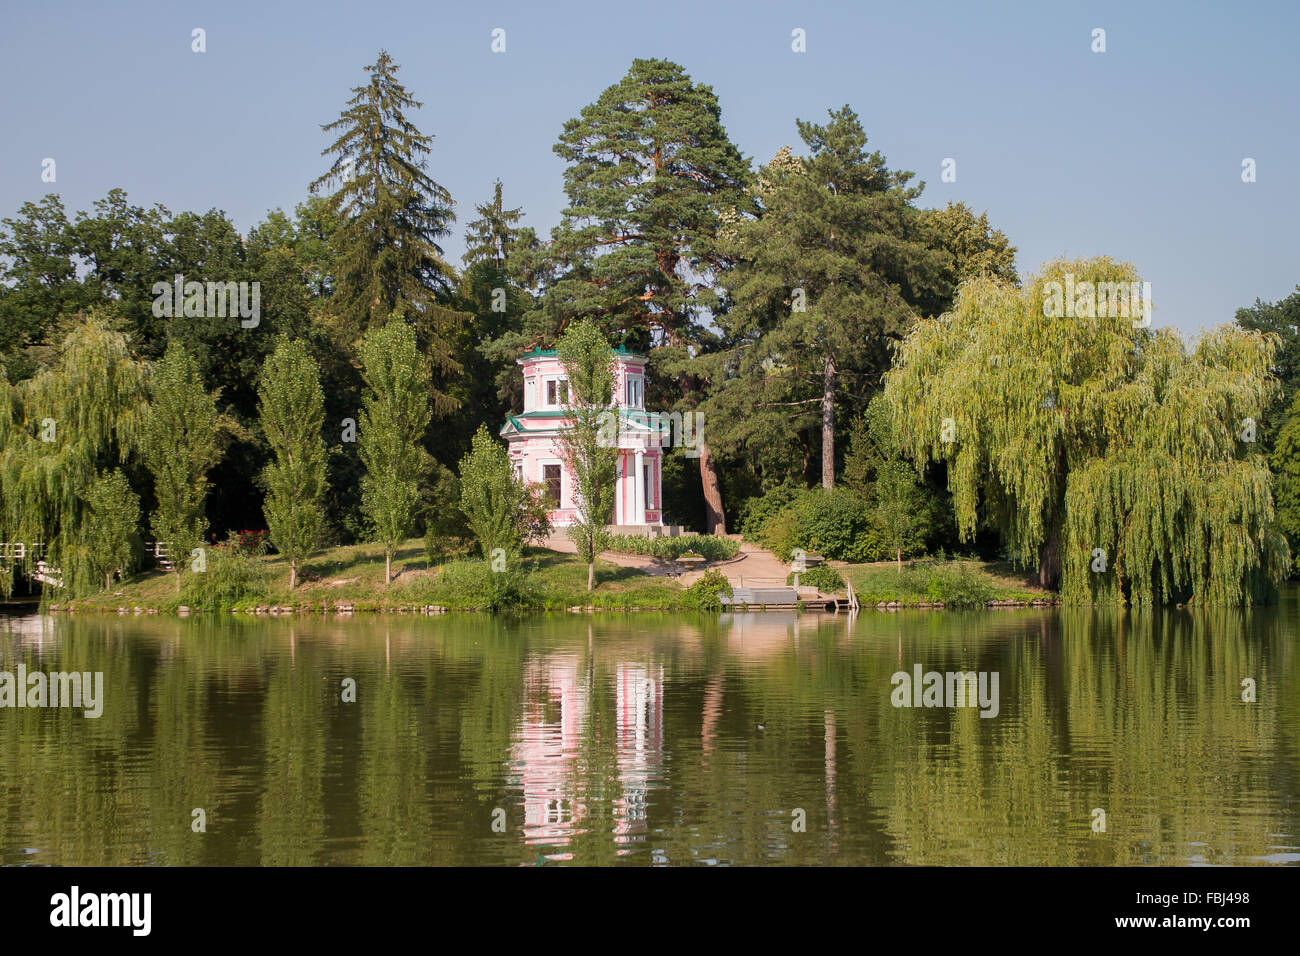 The pink building on a hill near the lake. Summer. Stock Photo